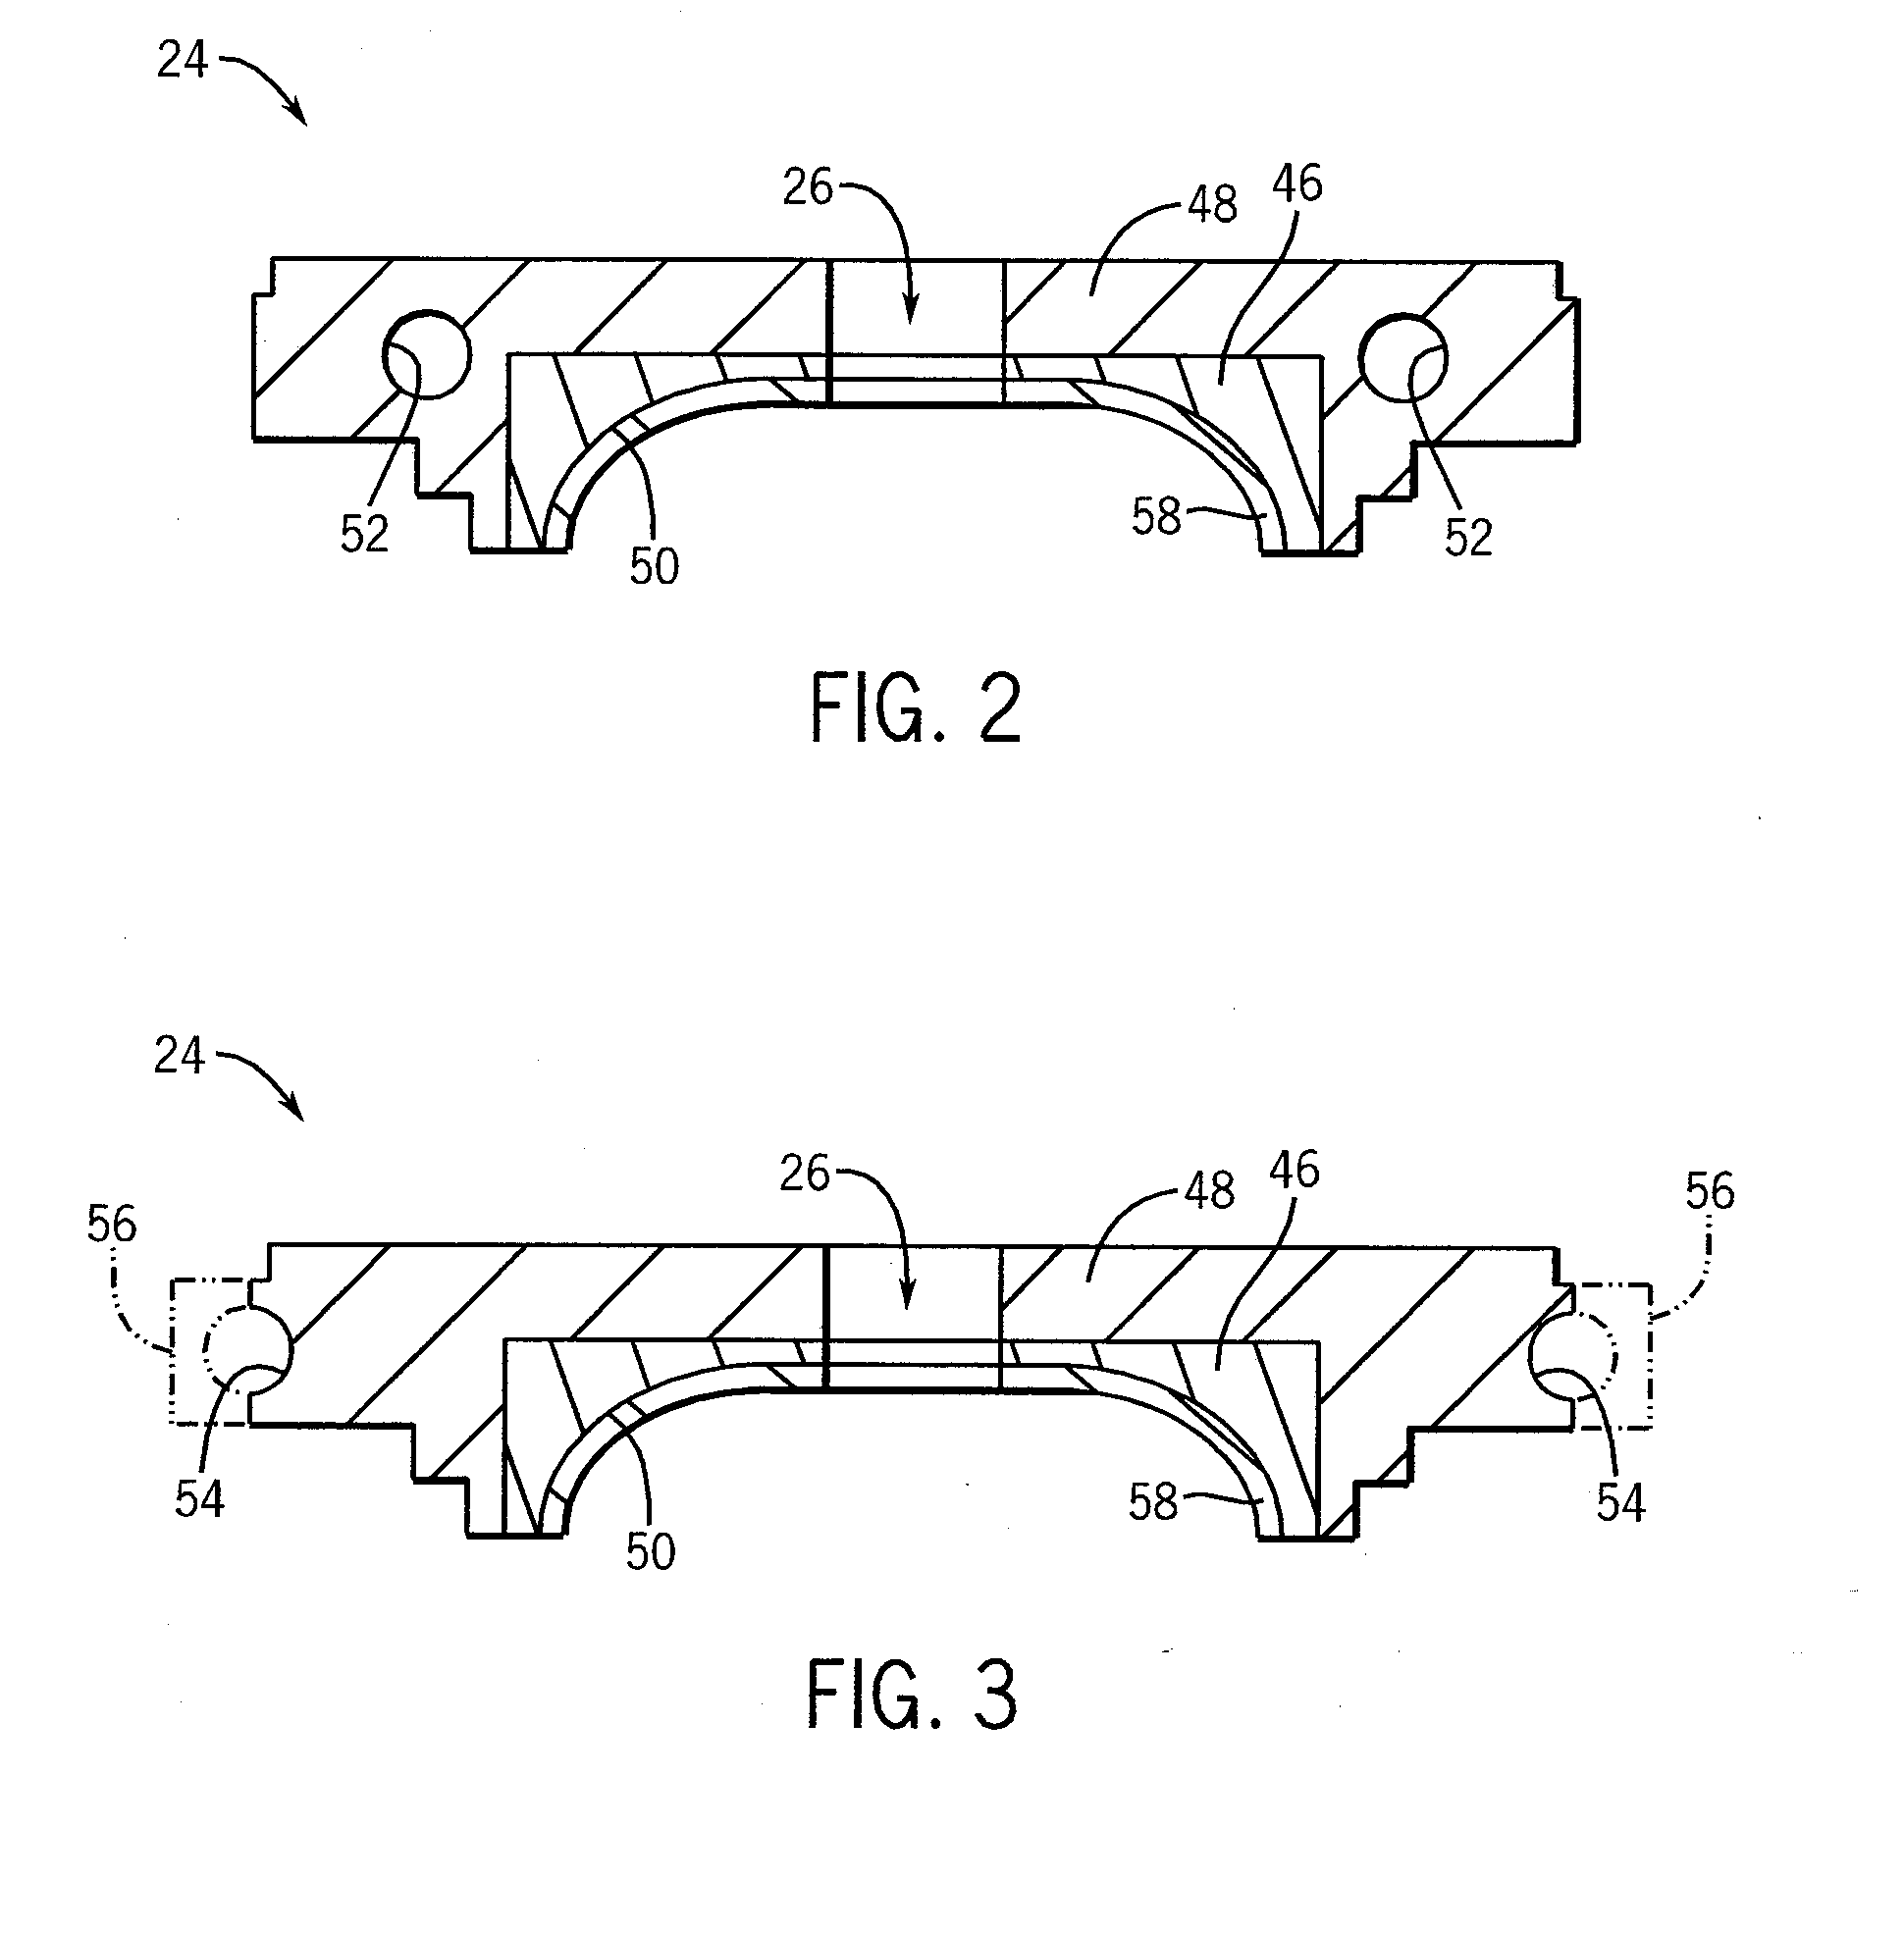 Electron absorption apparatus for an x-ray device